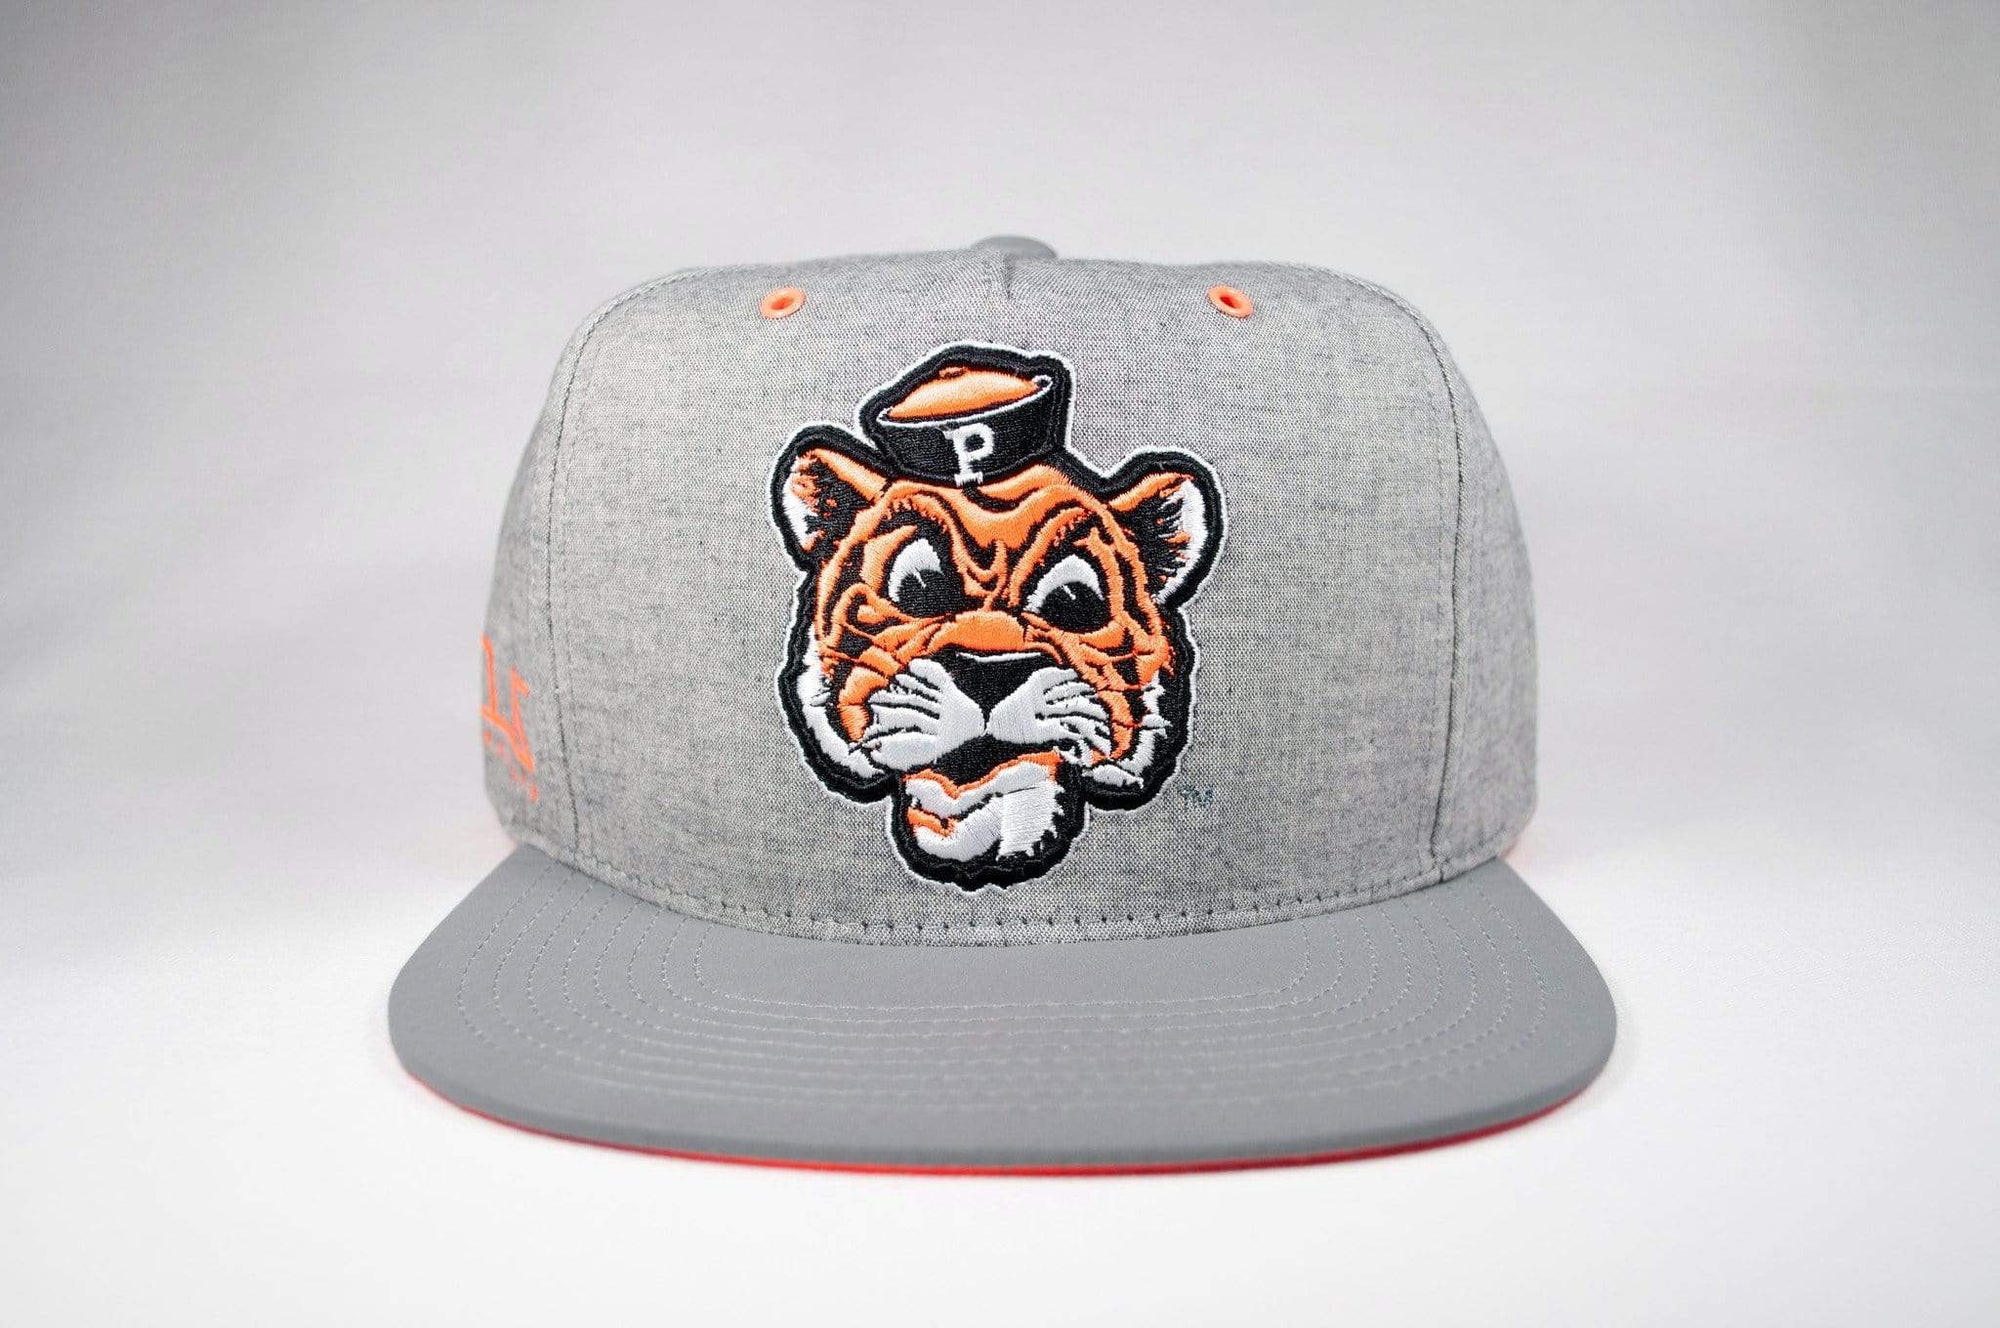 University of the Pacific Tigers Grey Matter 3M™ UOP Snapback [Limited Edition] Cap Hat by Zeus Collegiate